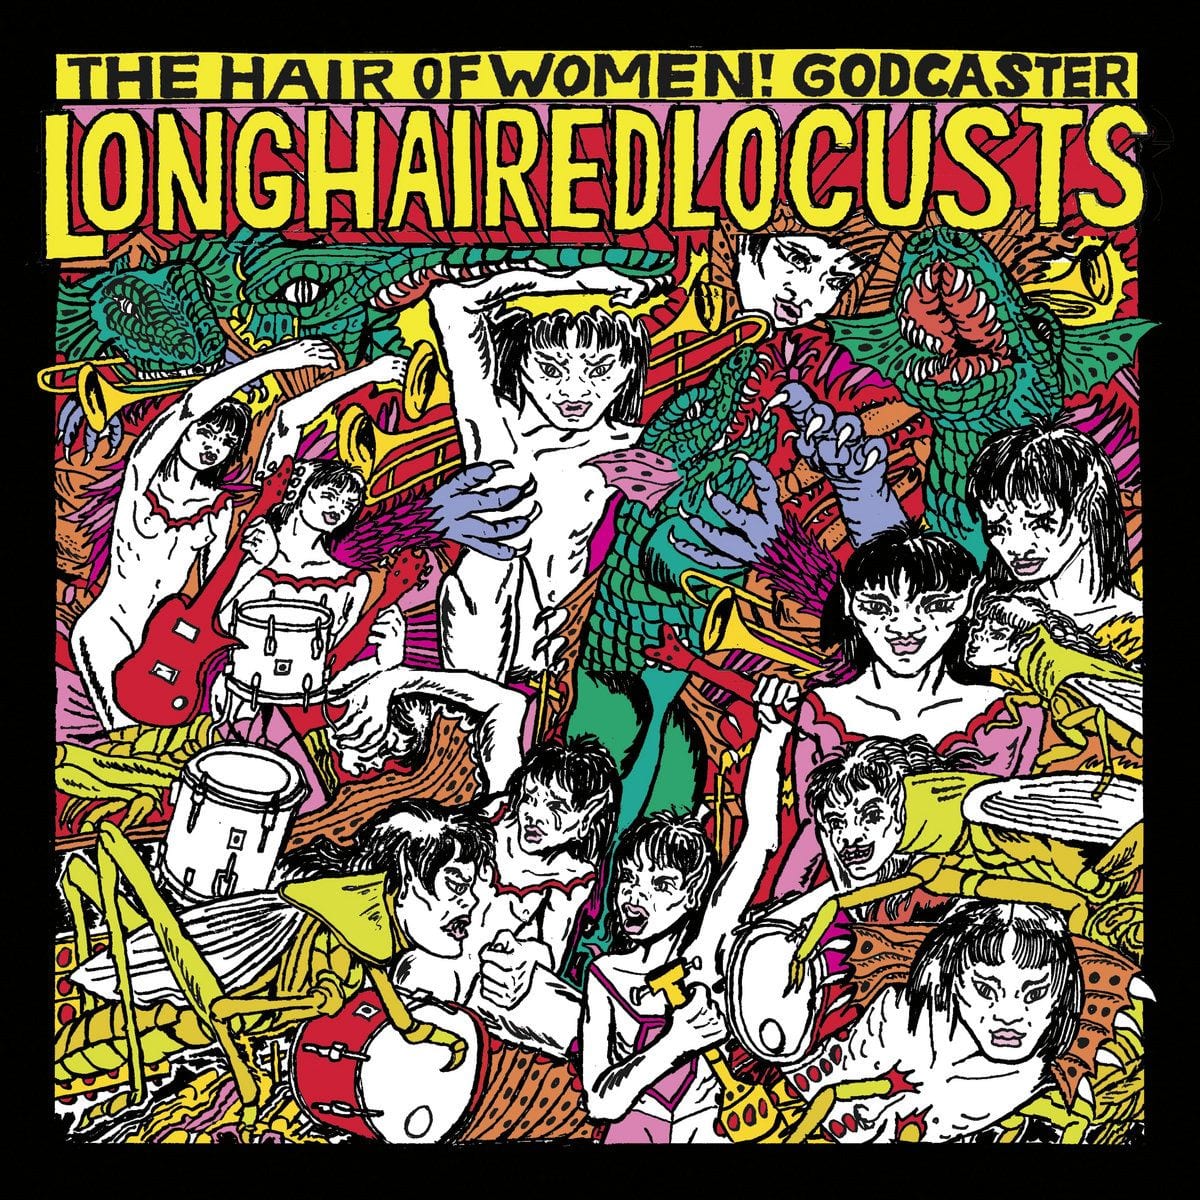 godcaster-long-haired-locusts